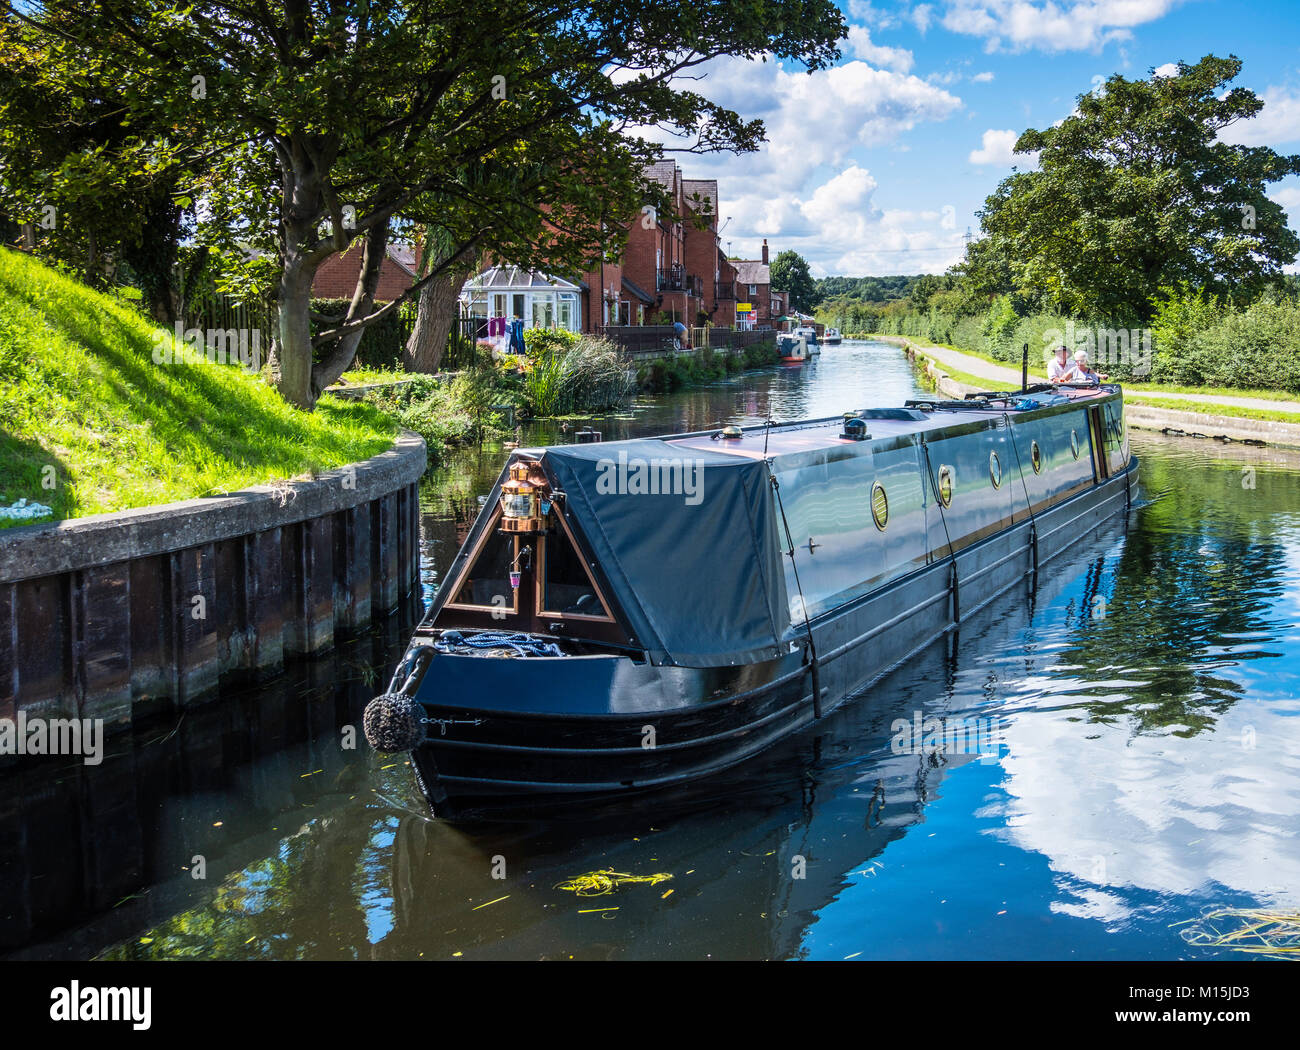 A narrowboat turns a sharp corner on a canal. Stock Photo